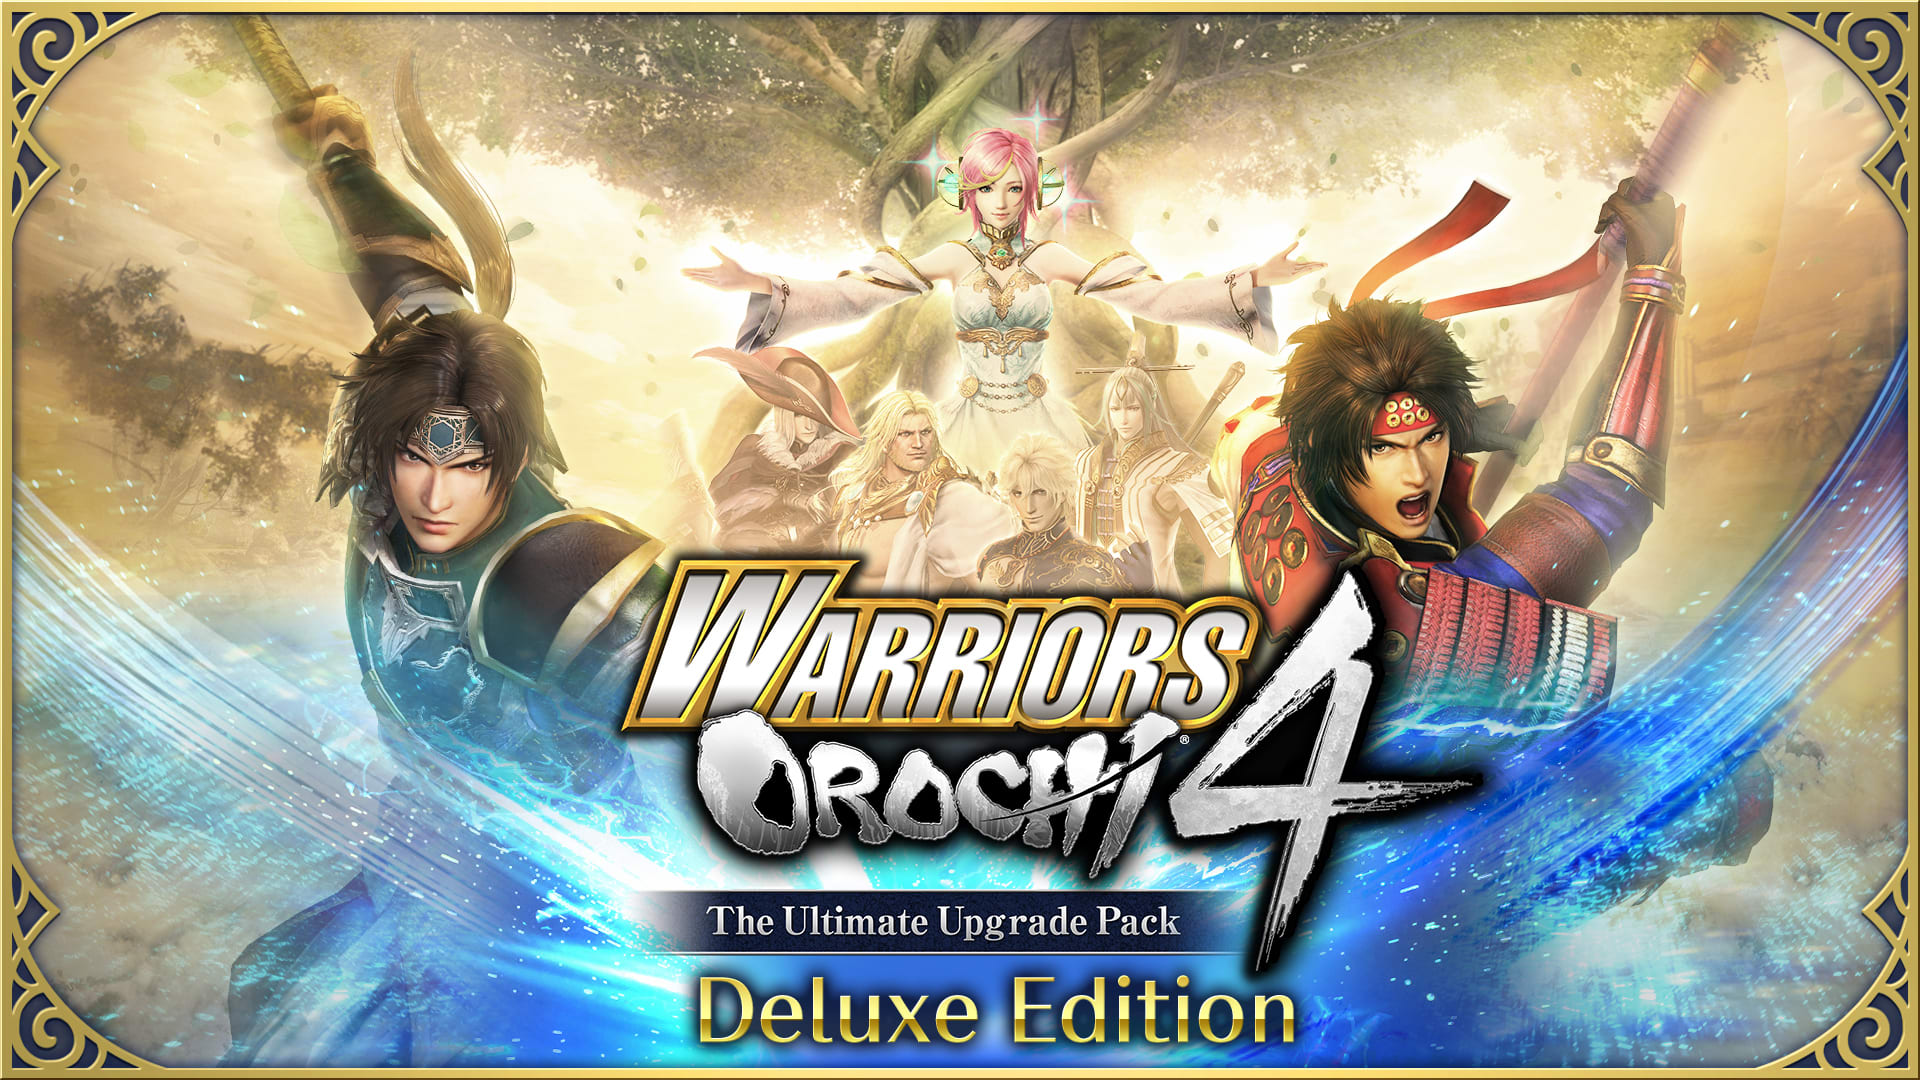 WARRIORS OROCHI 4: The Ultimate Upgrade Pack Deluxe Edition